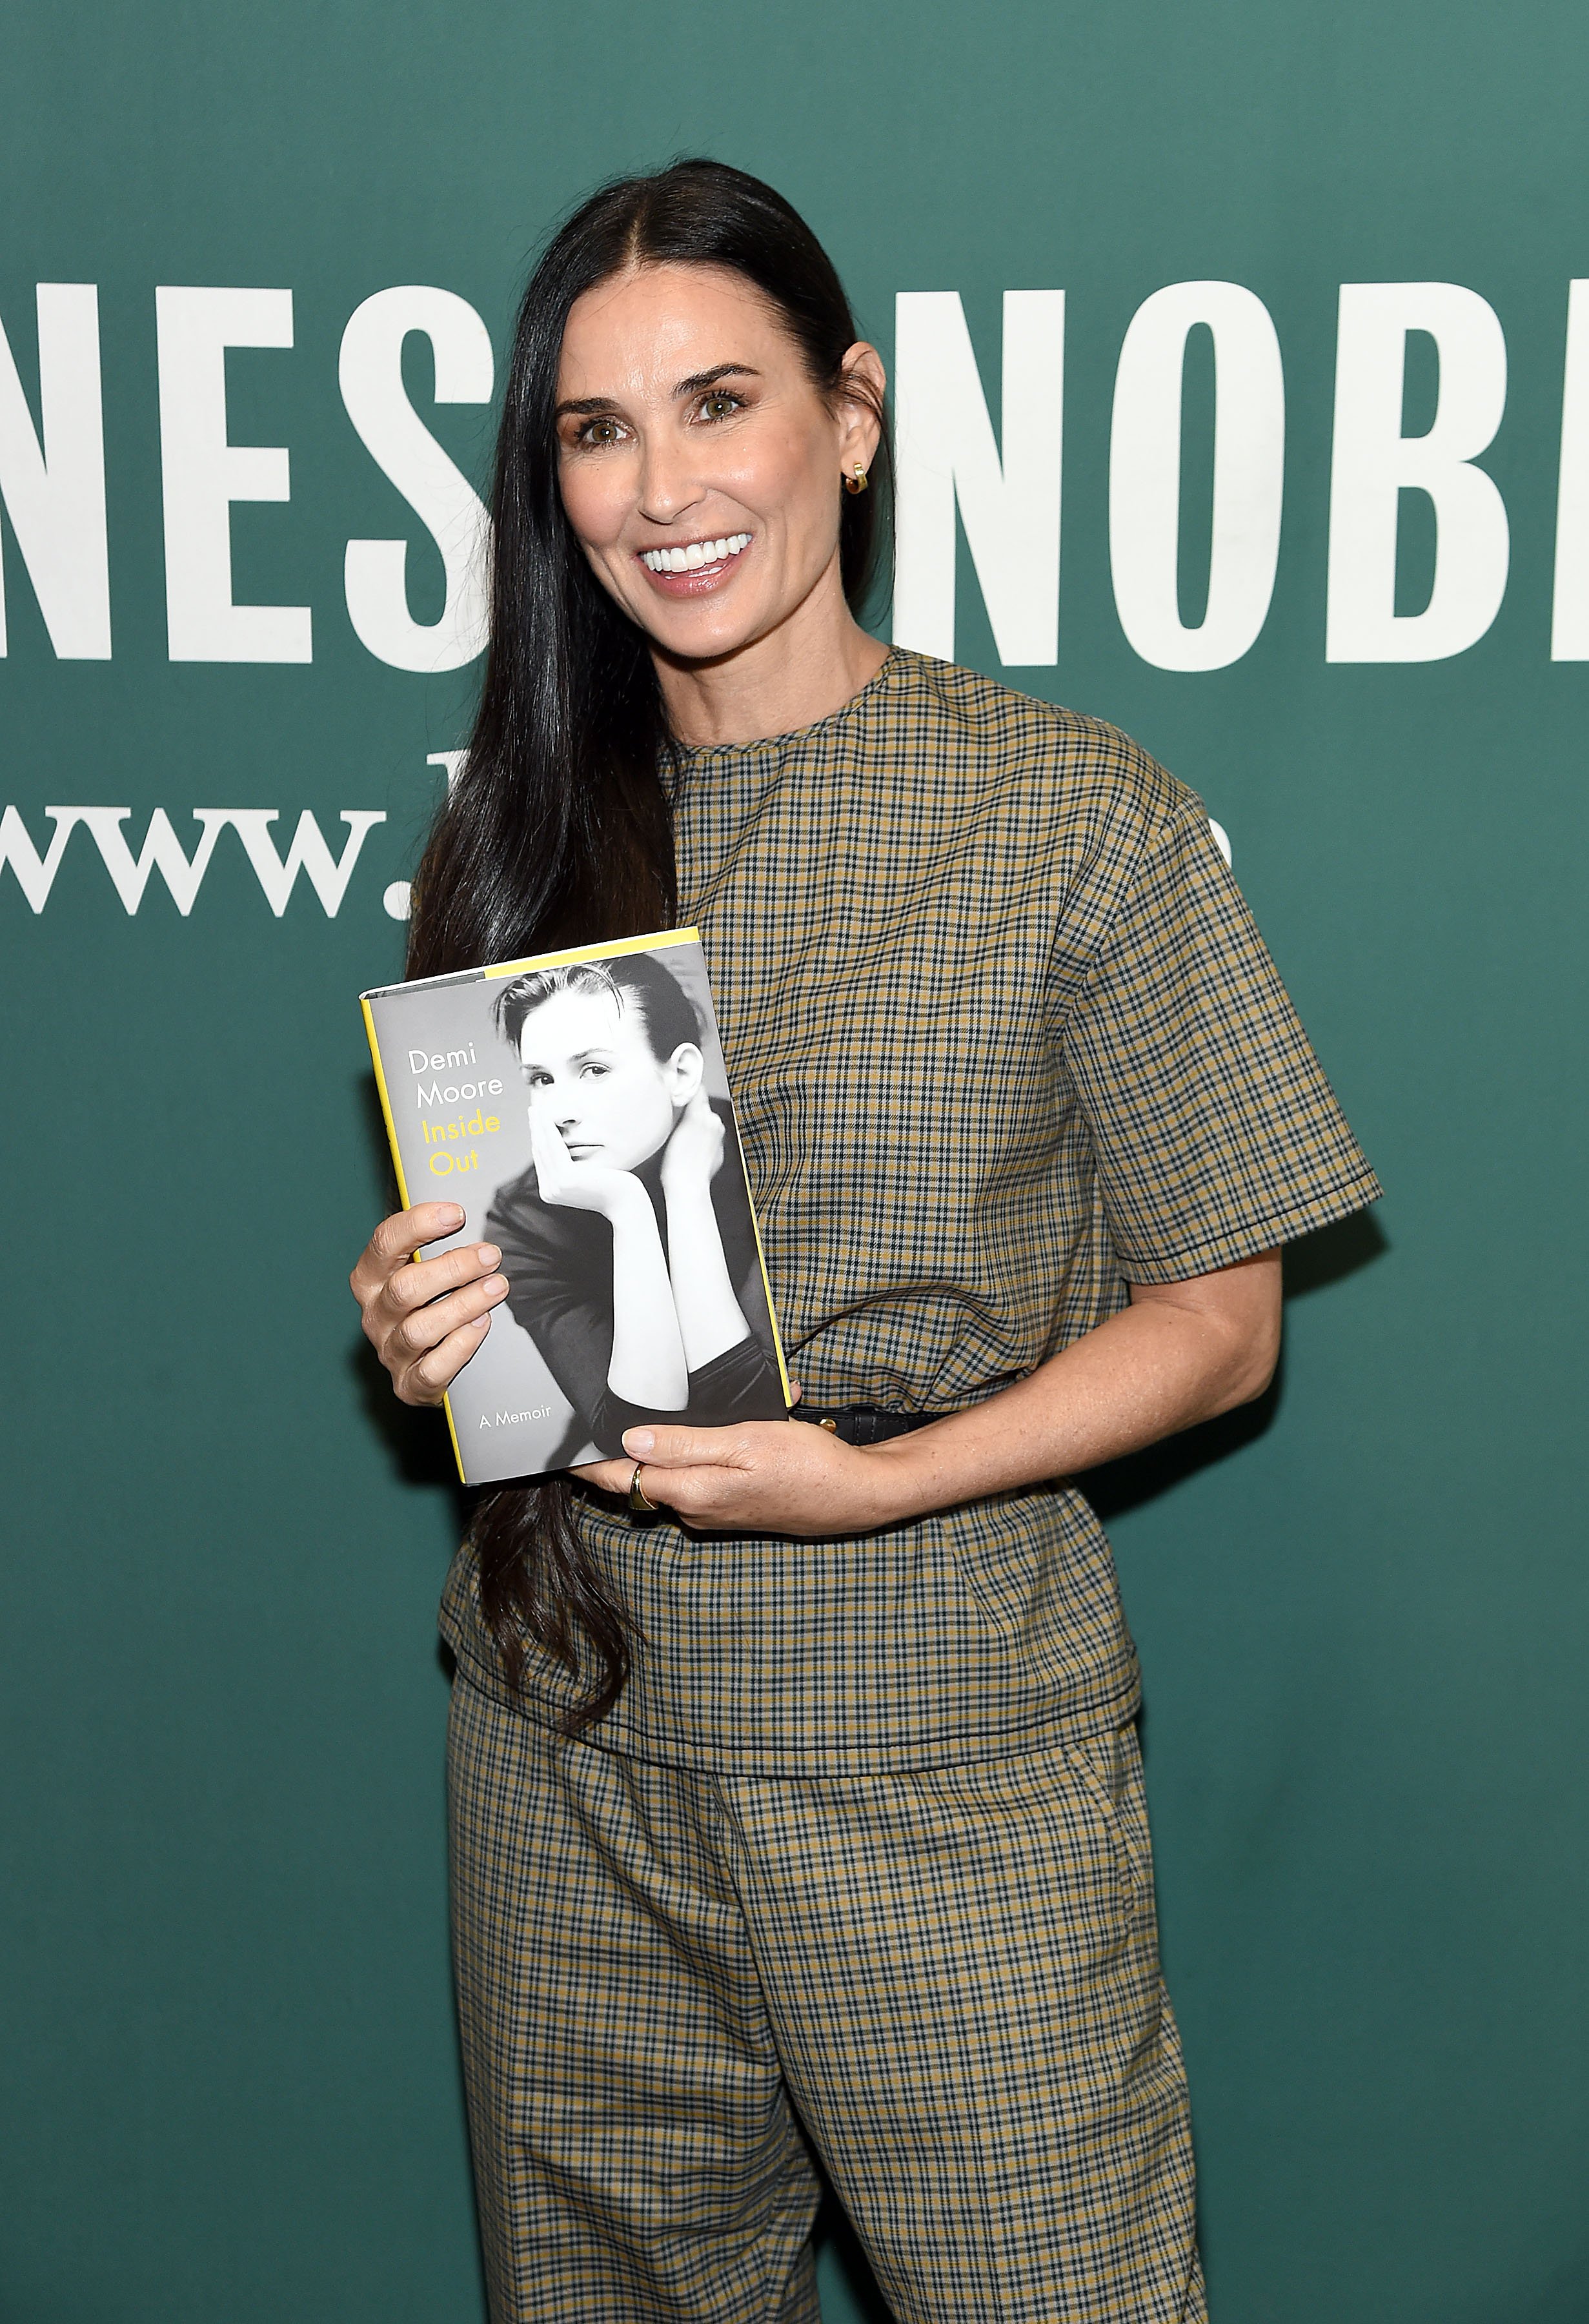 Demi Moore during the signing of her memoir "Inside Out" at Barnes & Noble Union Square on September 24, 2019 in New York City. / Source: Getty Images